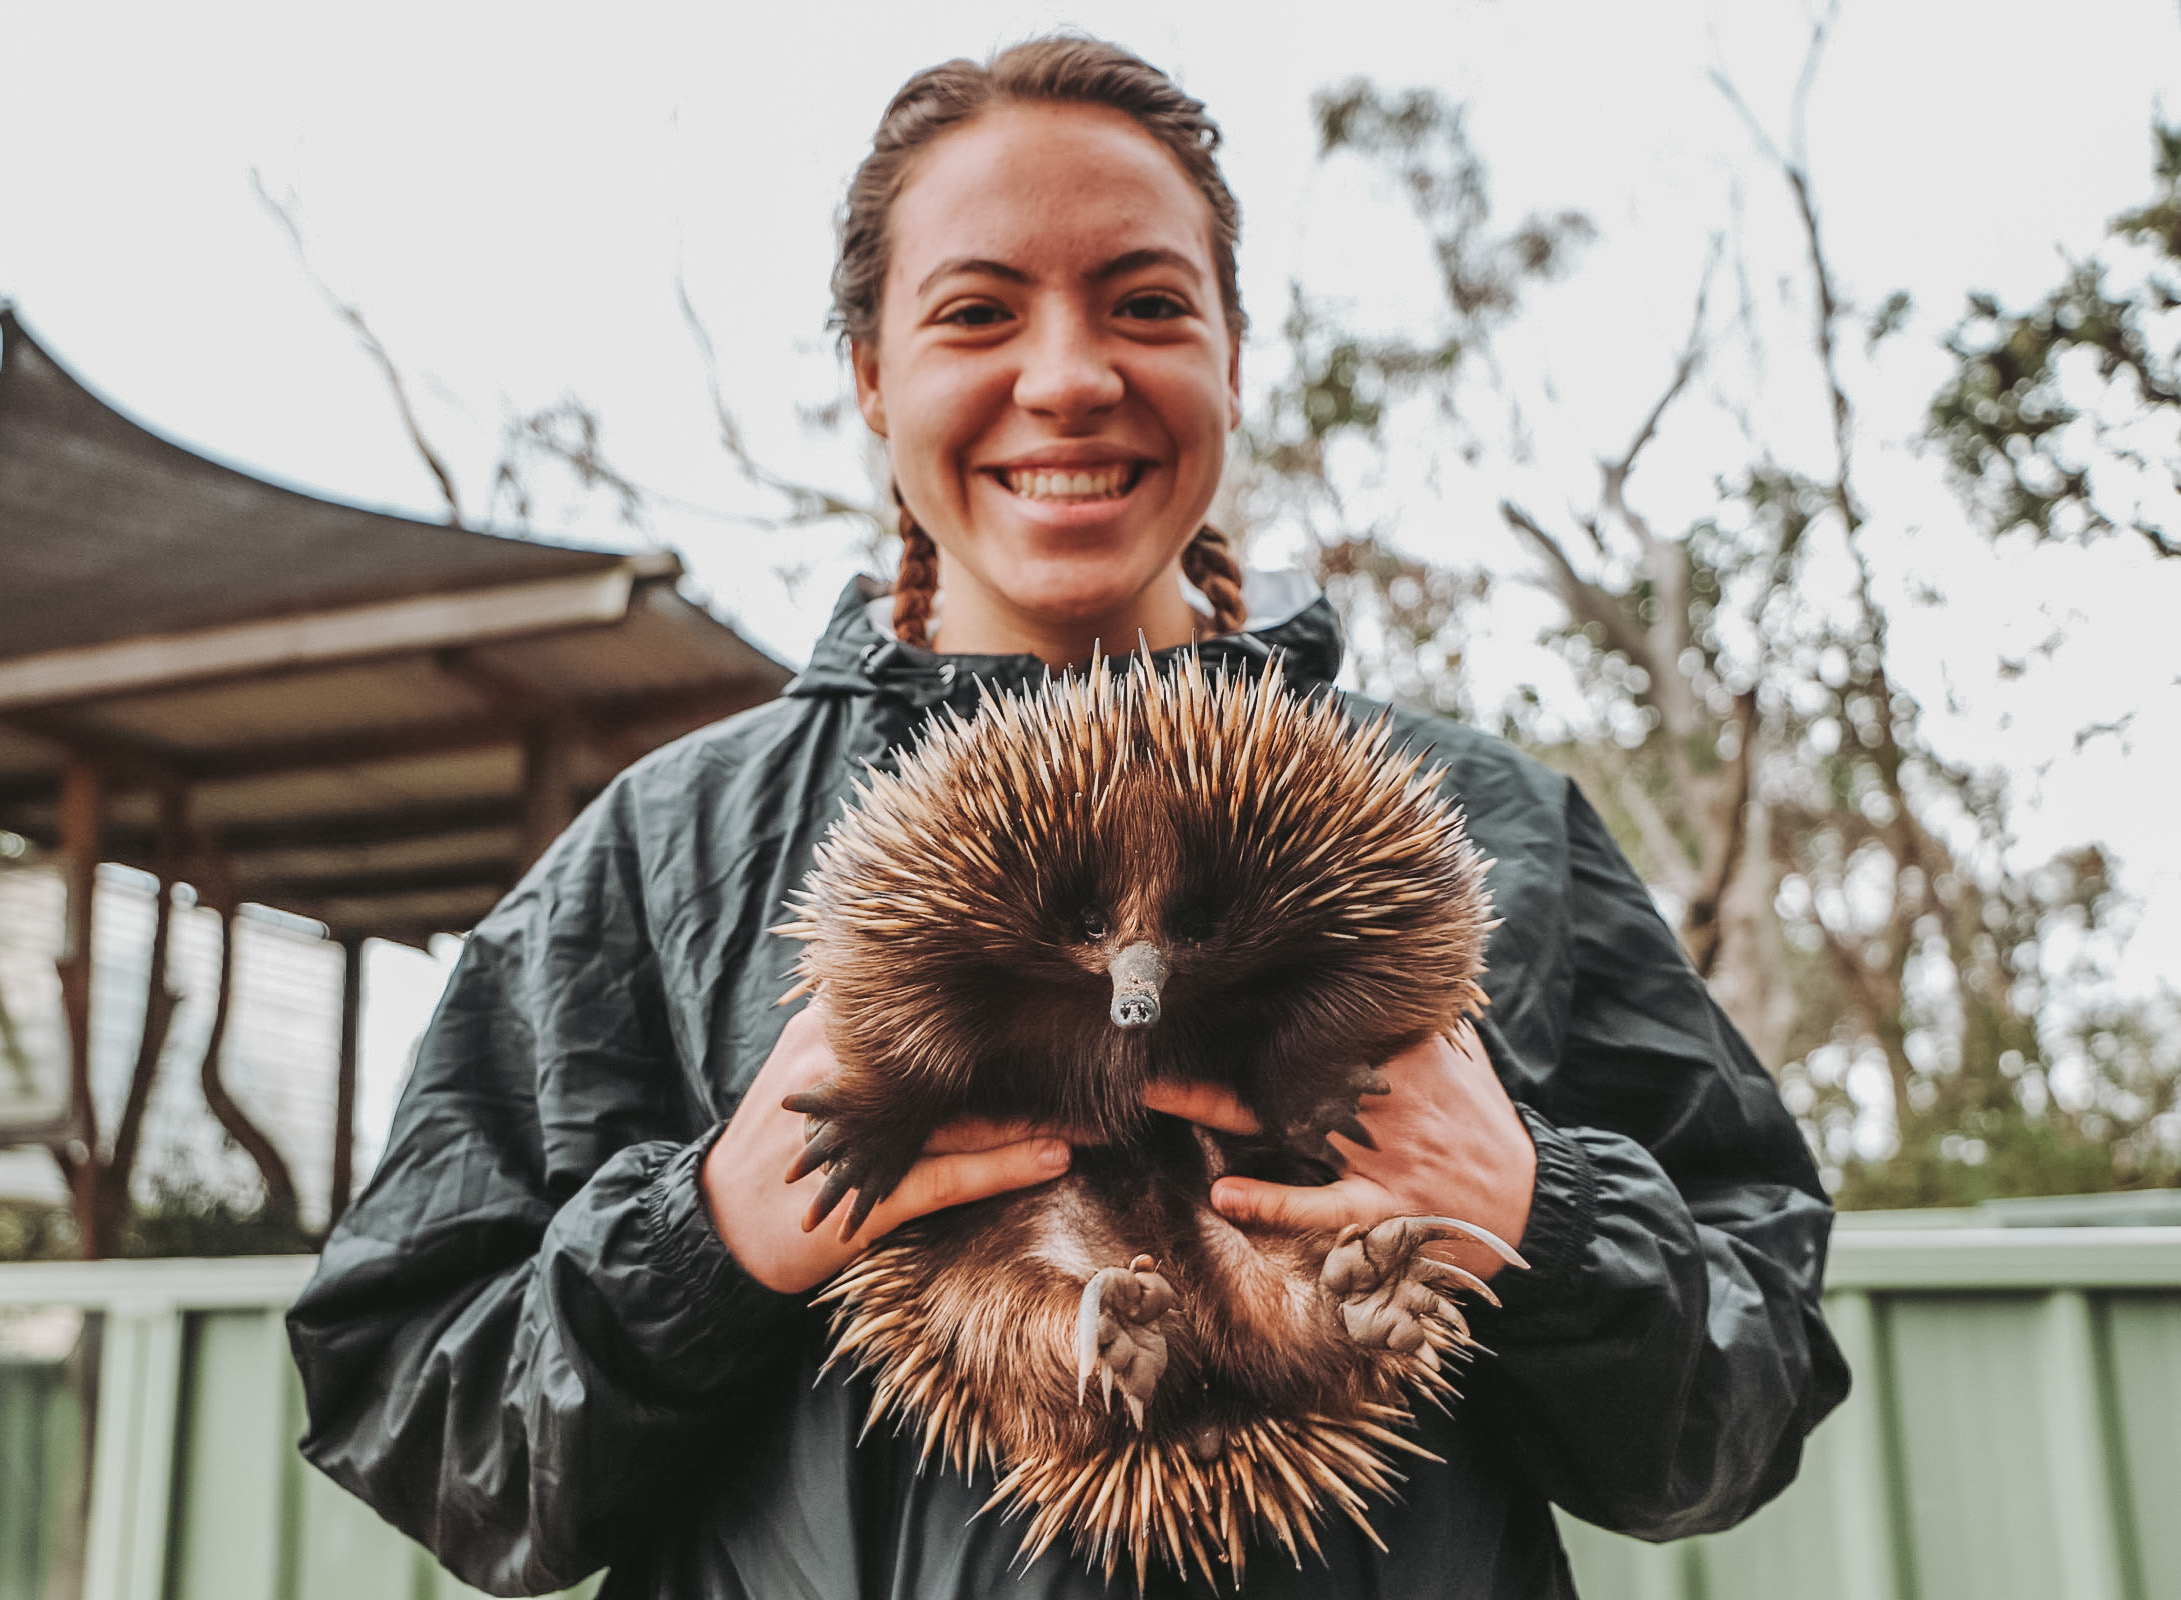 Smiling, Evelyn holds an echidna and faces the camera